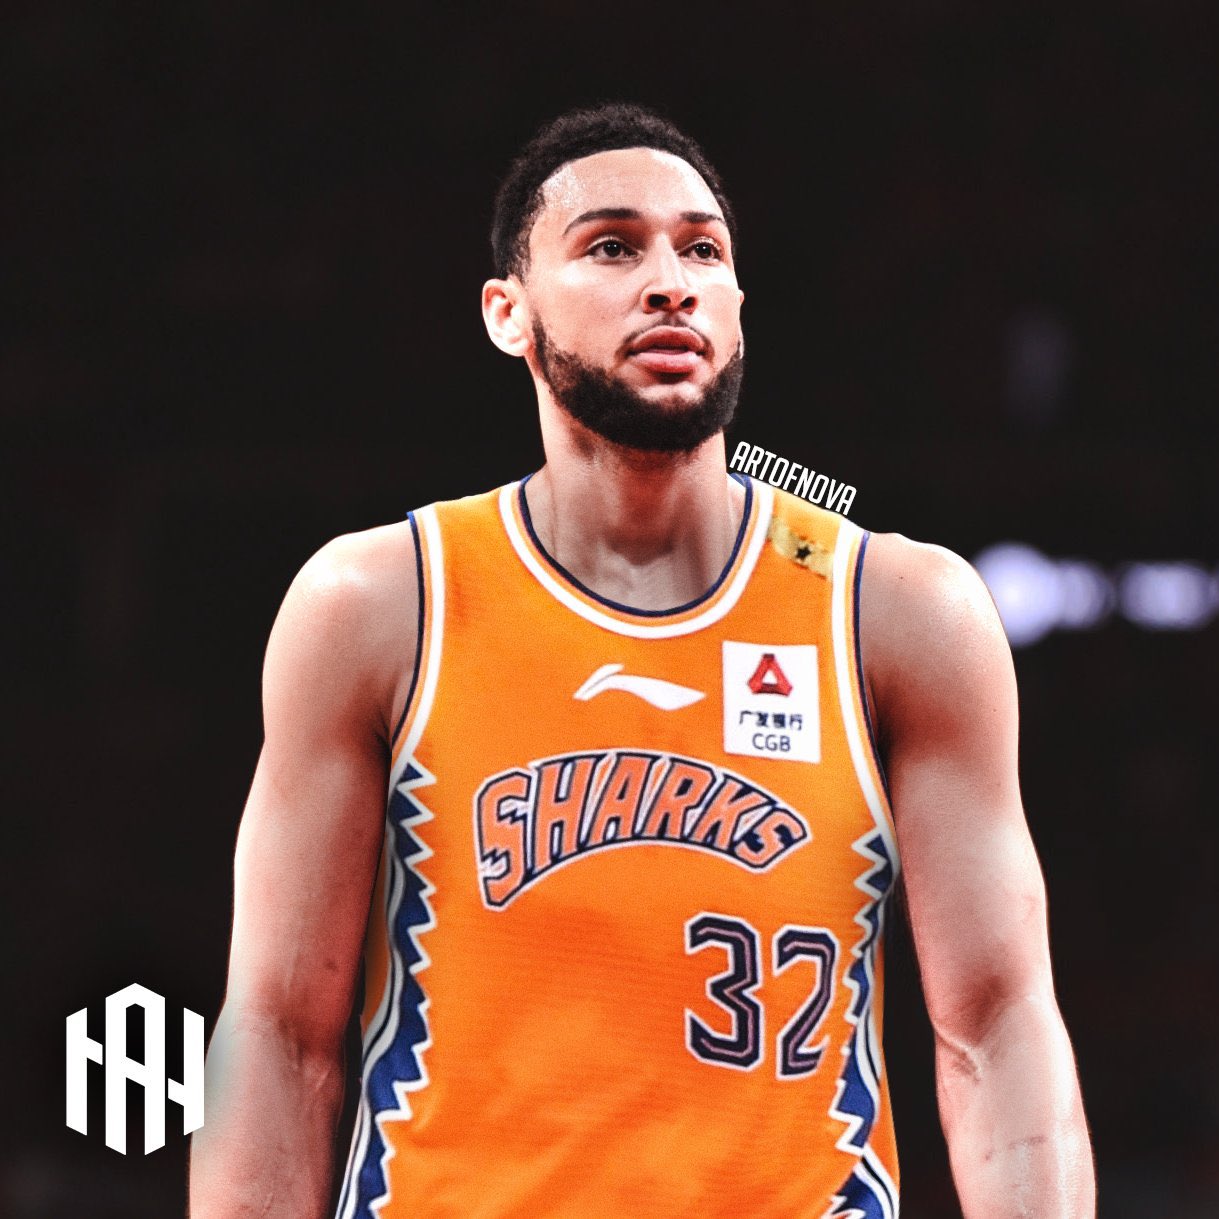 Welcome to the Shanghai Sharks Ben Simmons. 😖 #bensimmons